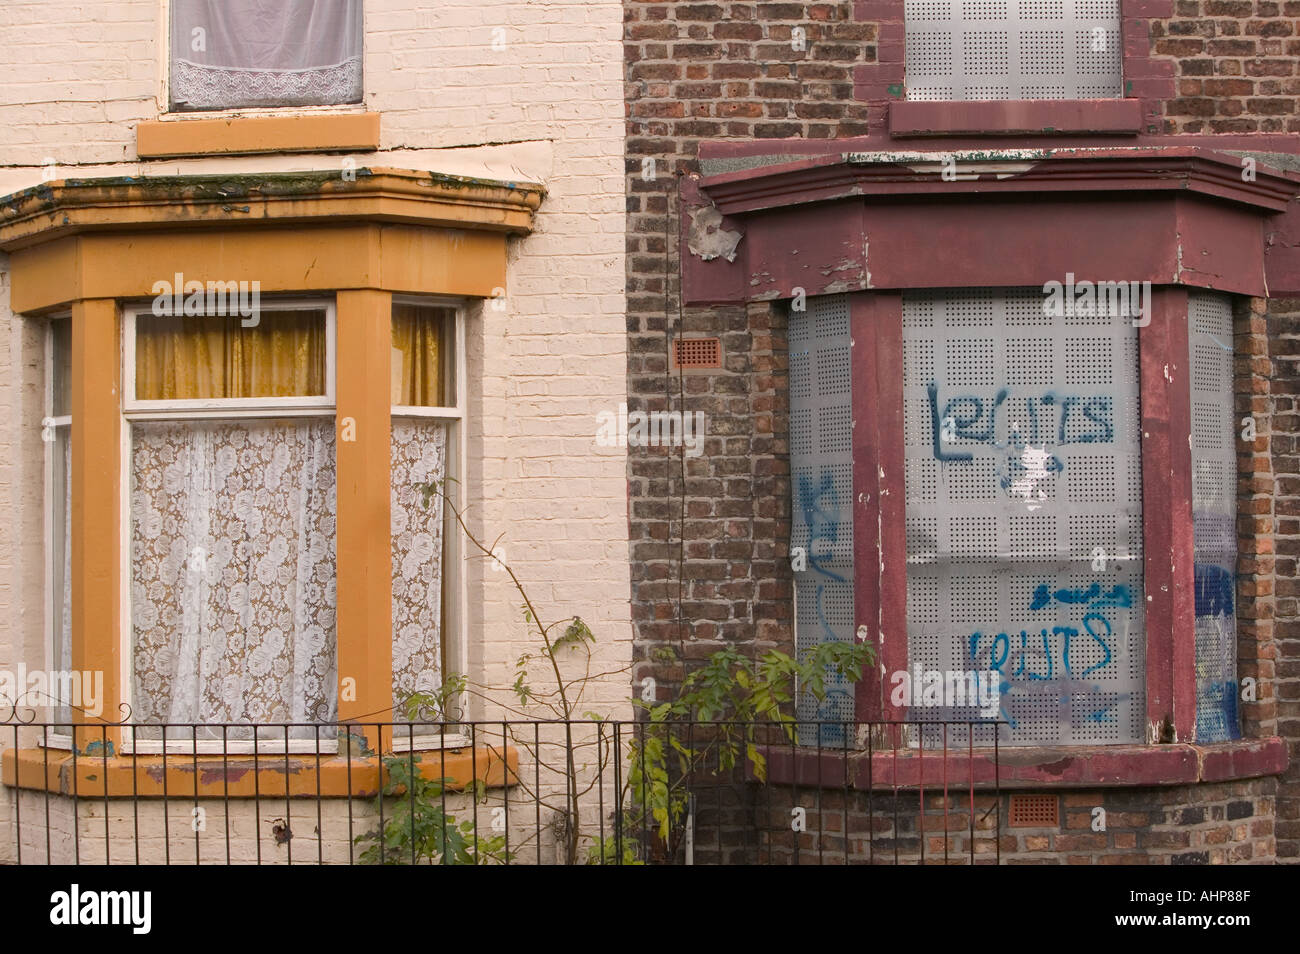 Boarded up house next to a lived in house in kensington Liverpool Stock Photo